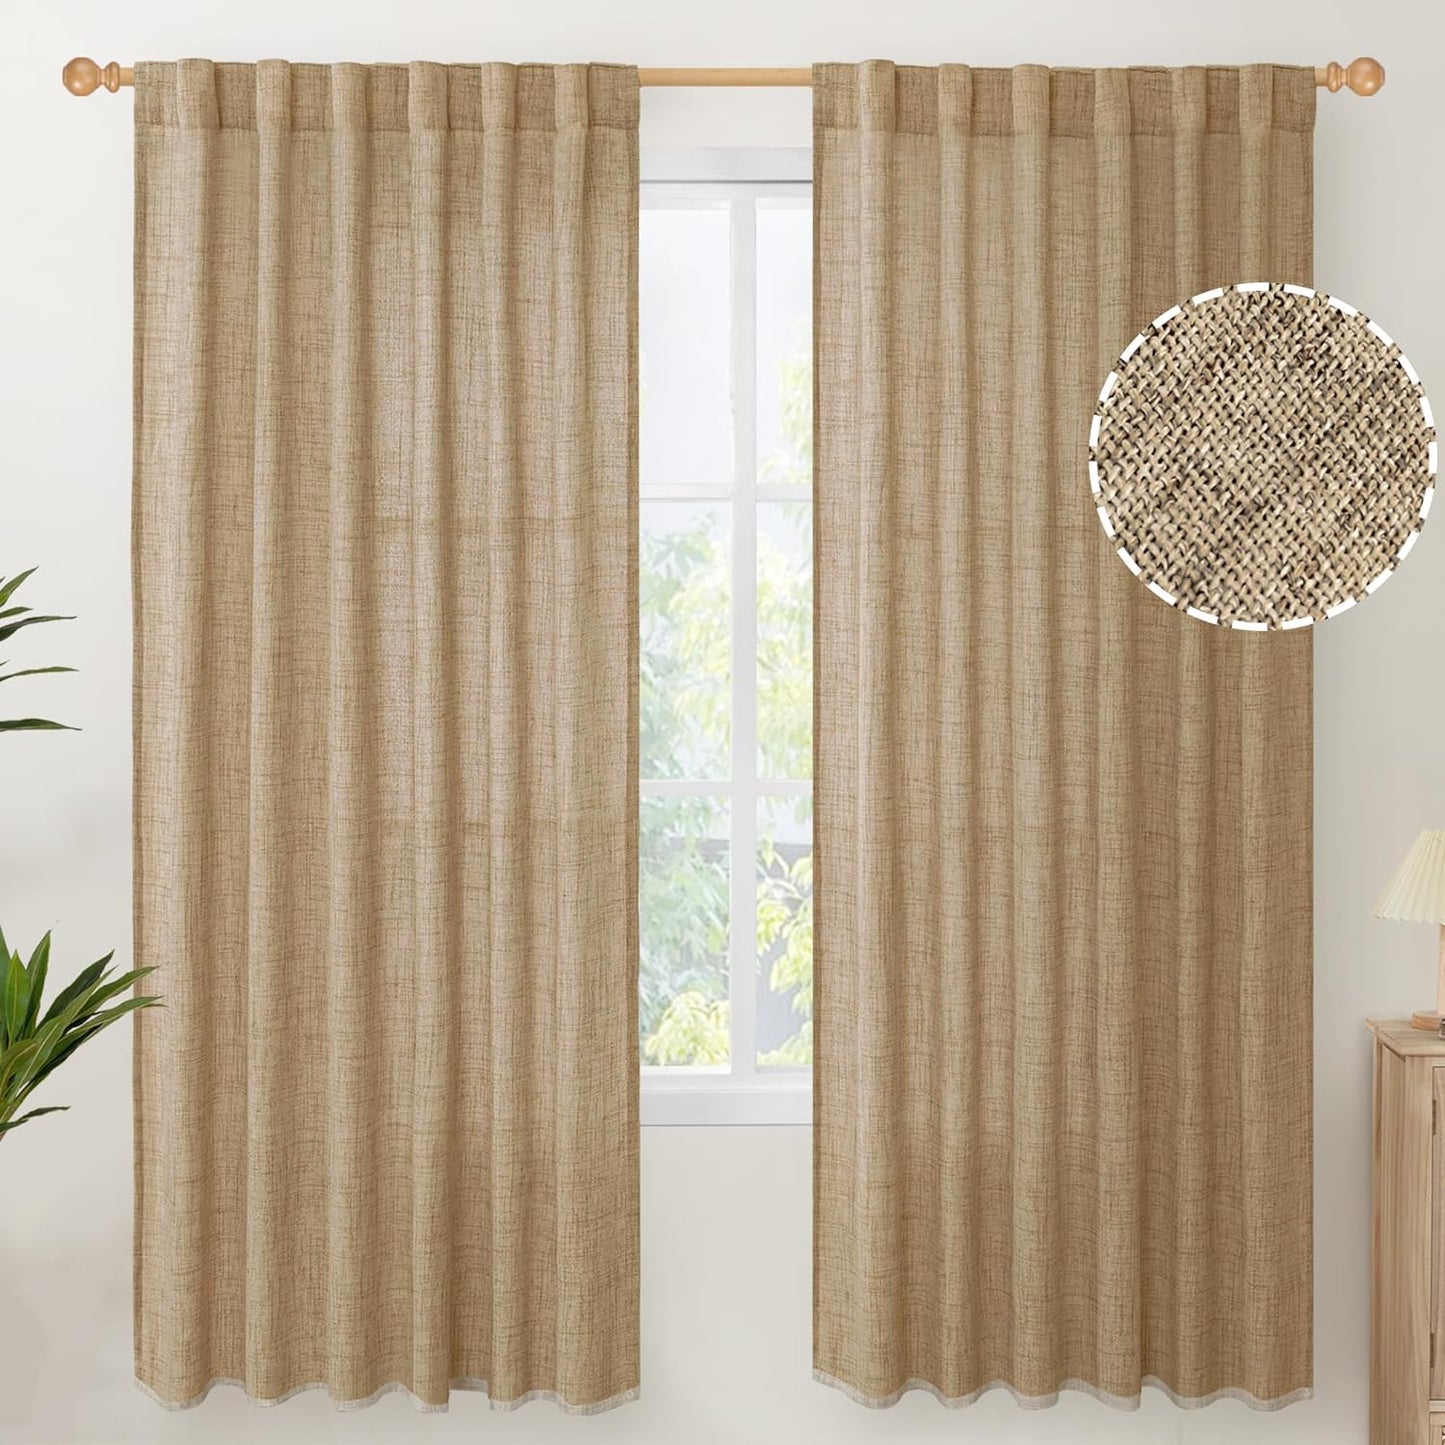 Youngstex Natural Linen Curtains 72 Inch Length 2 Panels for Living Room Light Filtering Textured Window Drapes for Bedroom Dining Office Back Tab Rod Pocket, 52 X 72 Inch  YoungsTex Toffee 52W X 72L 